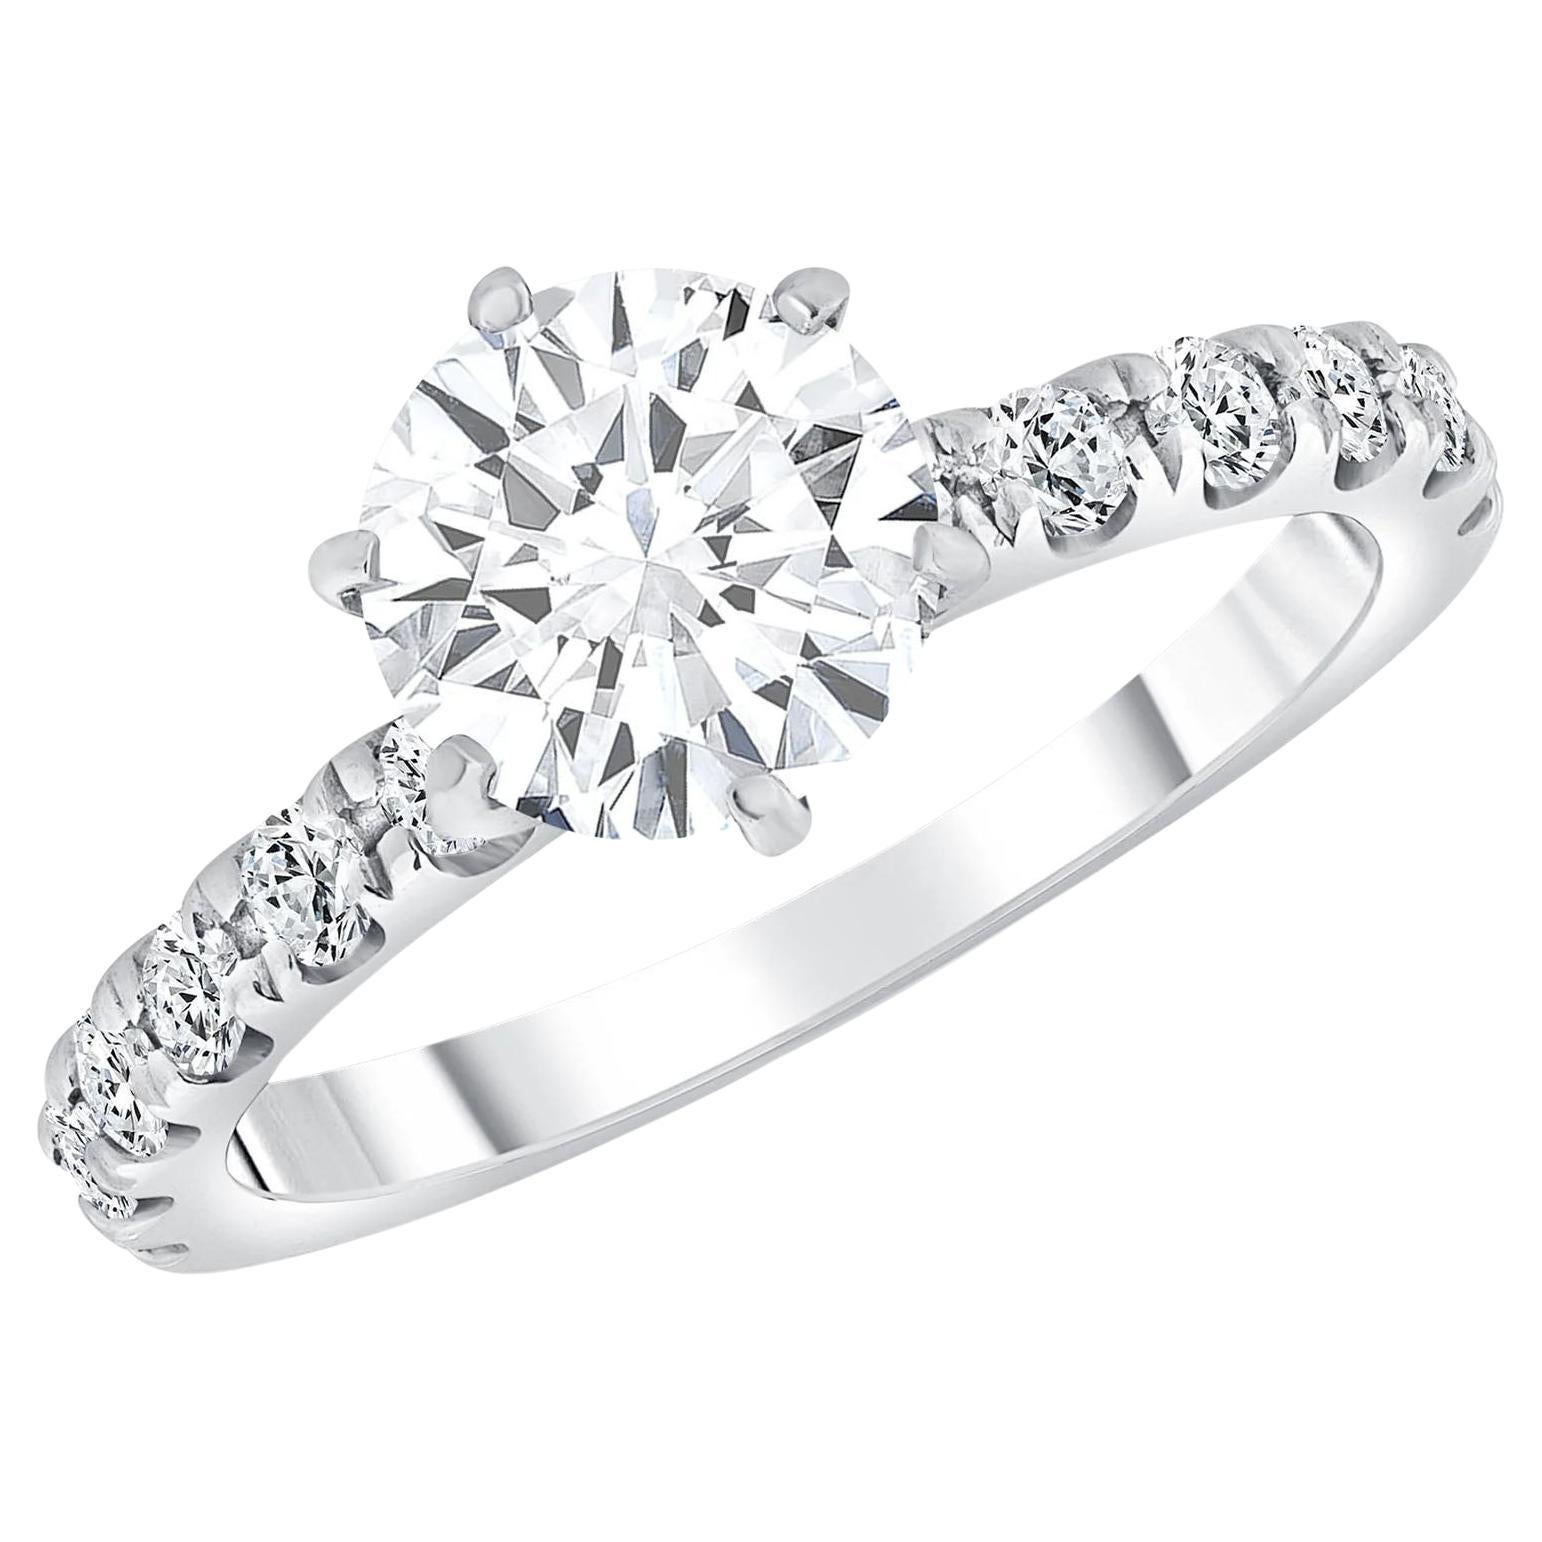 For Sale:  Rylie's Solitaire Engagement Ring 6-prong Half-eternity 2